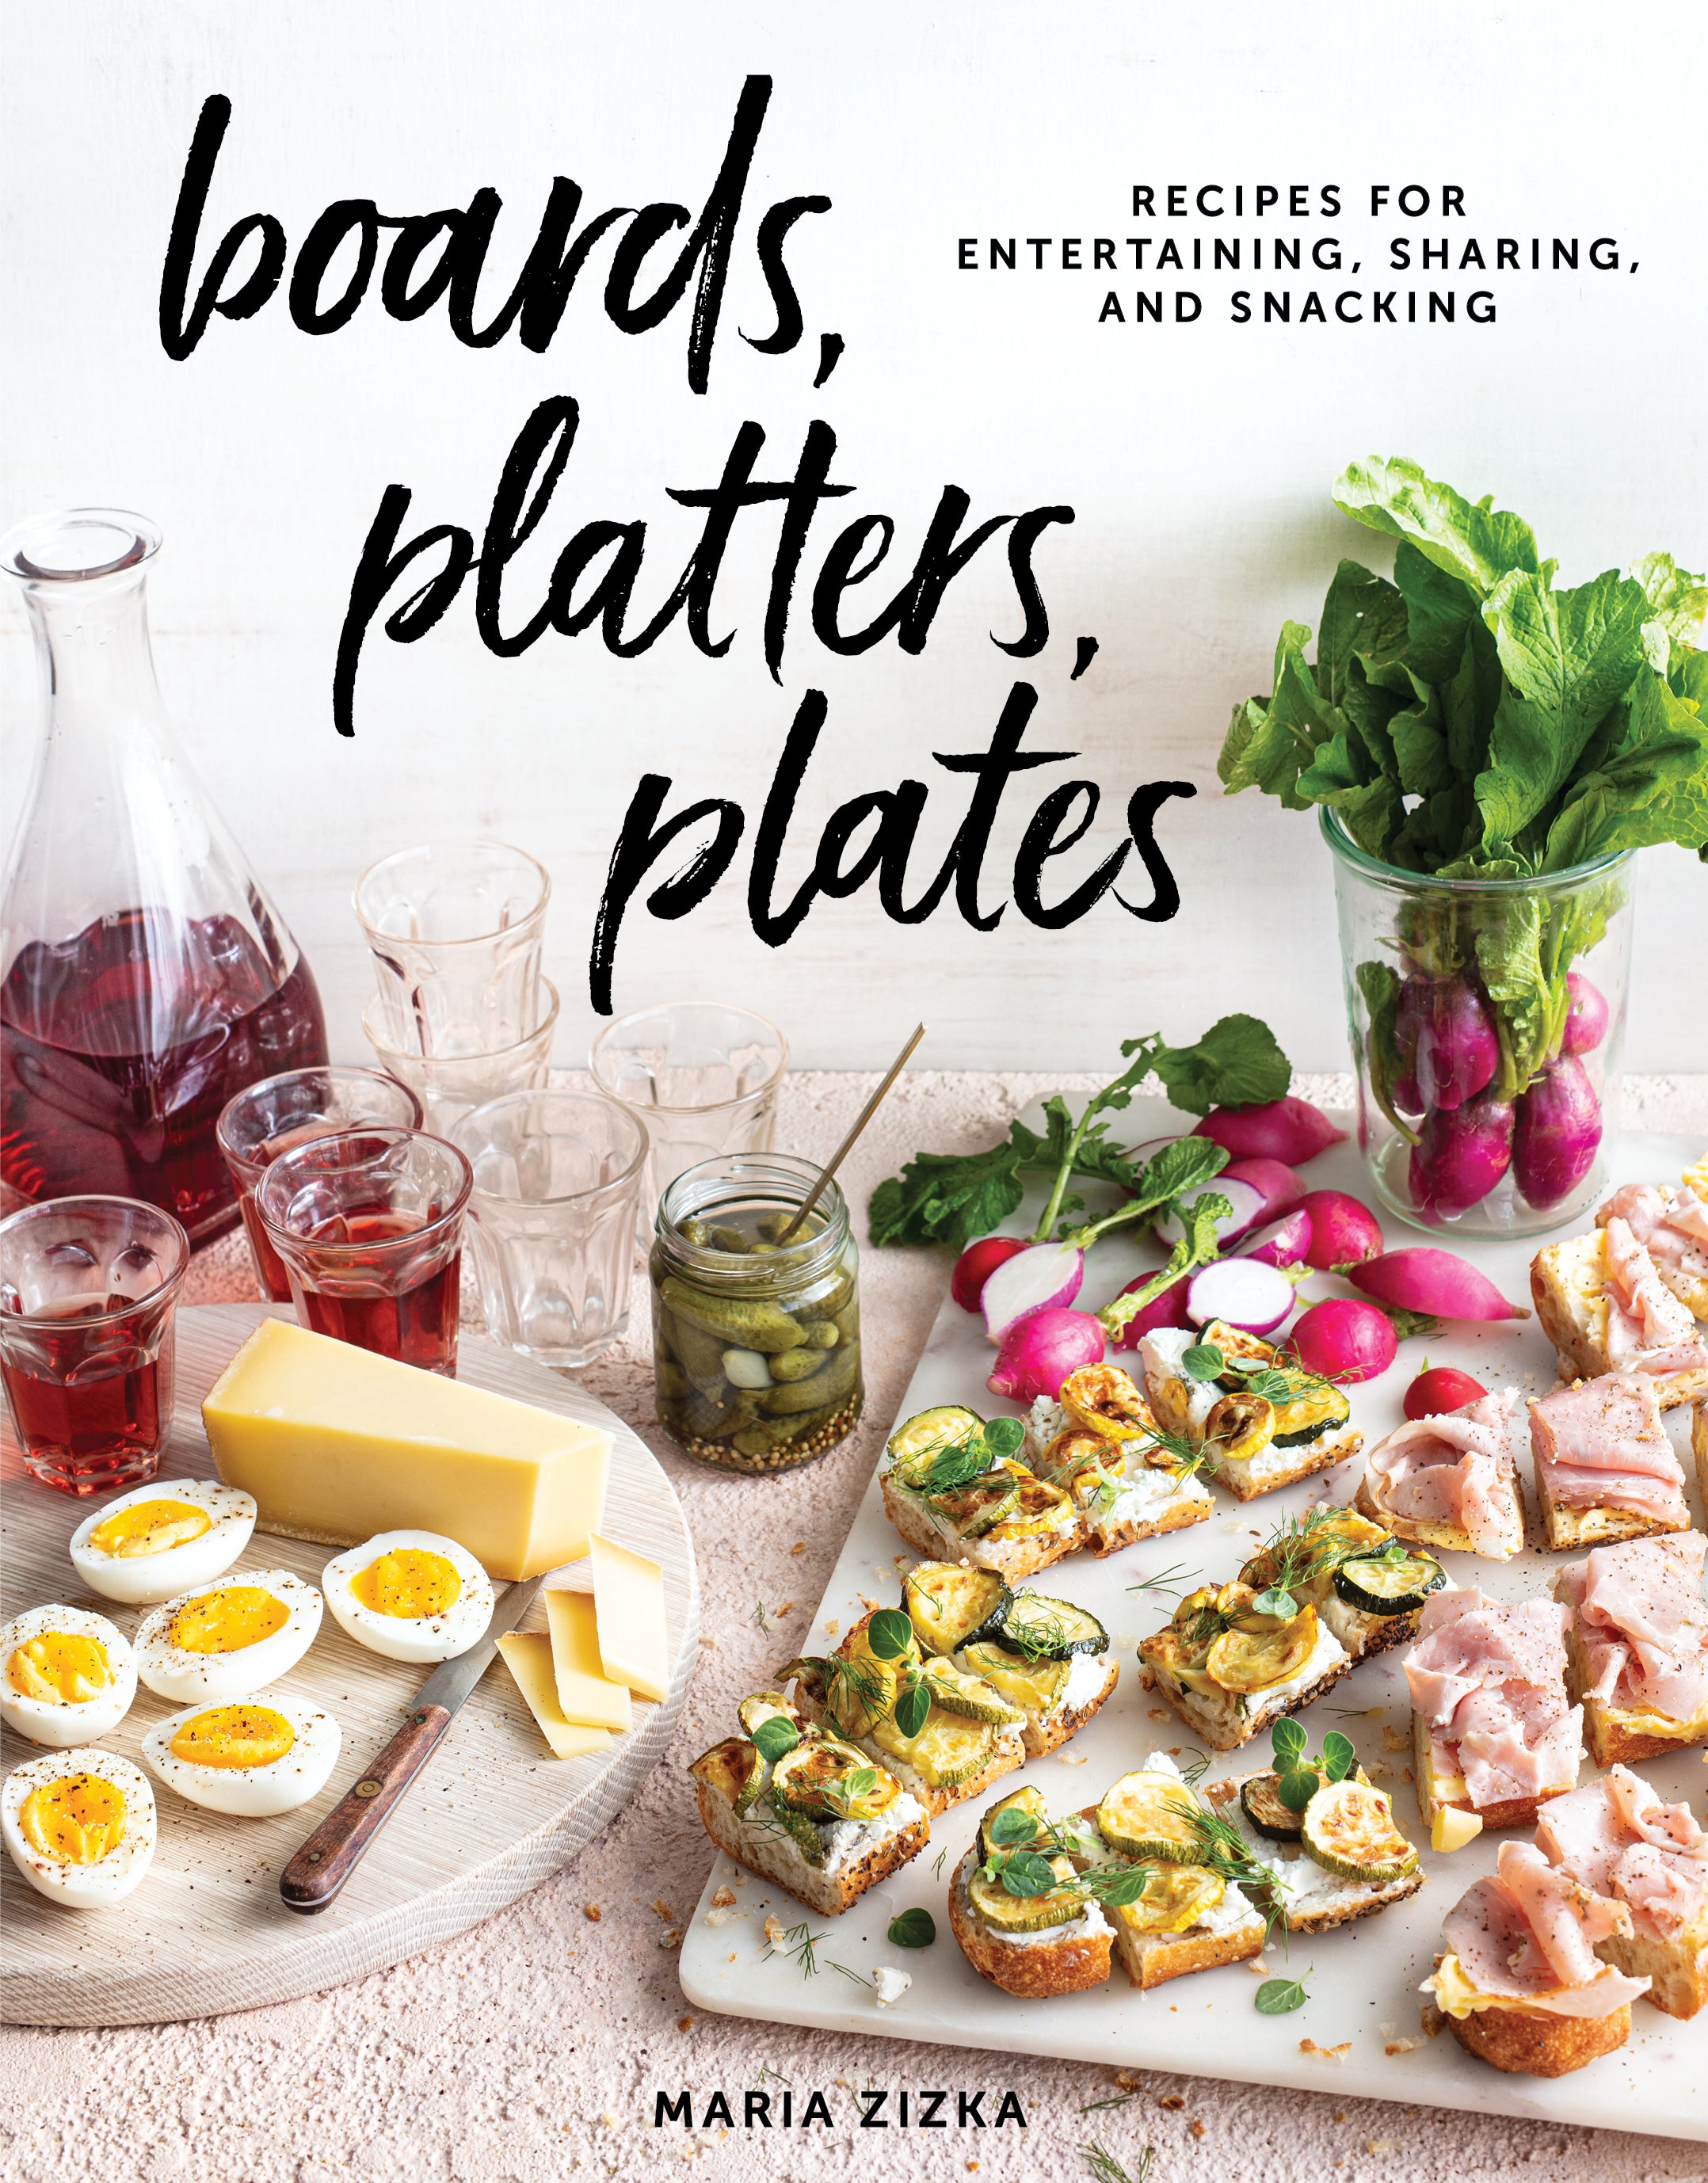 Boards, Platters, Plates - Recipes for Entertaining, Sharing and Snacking    